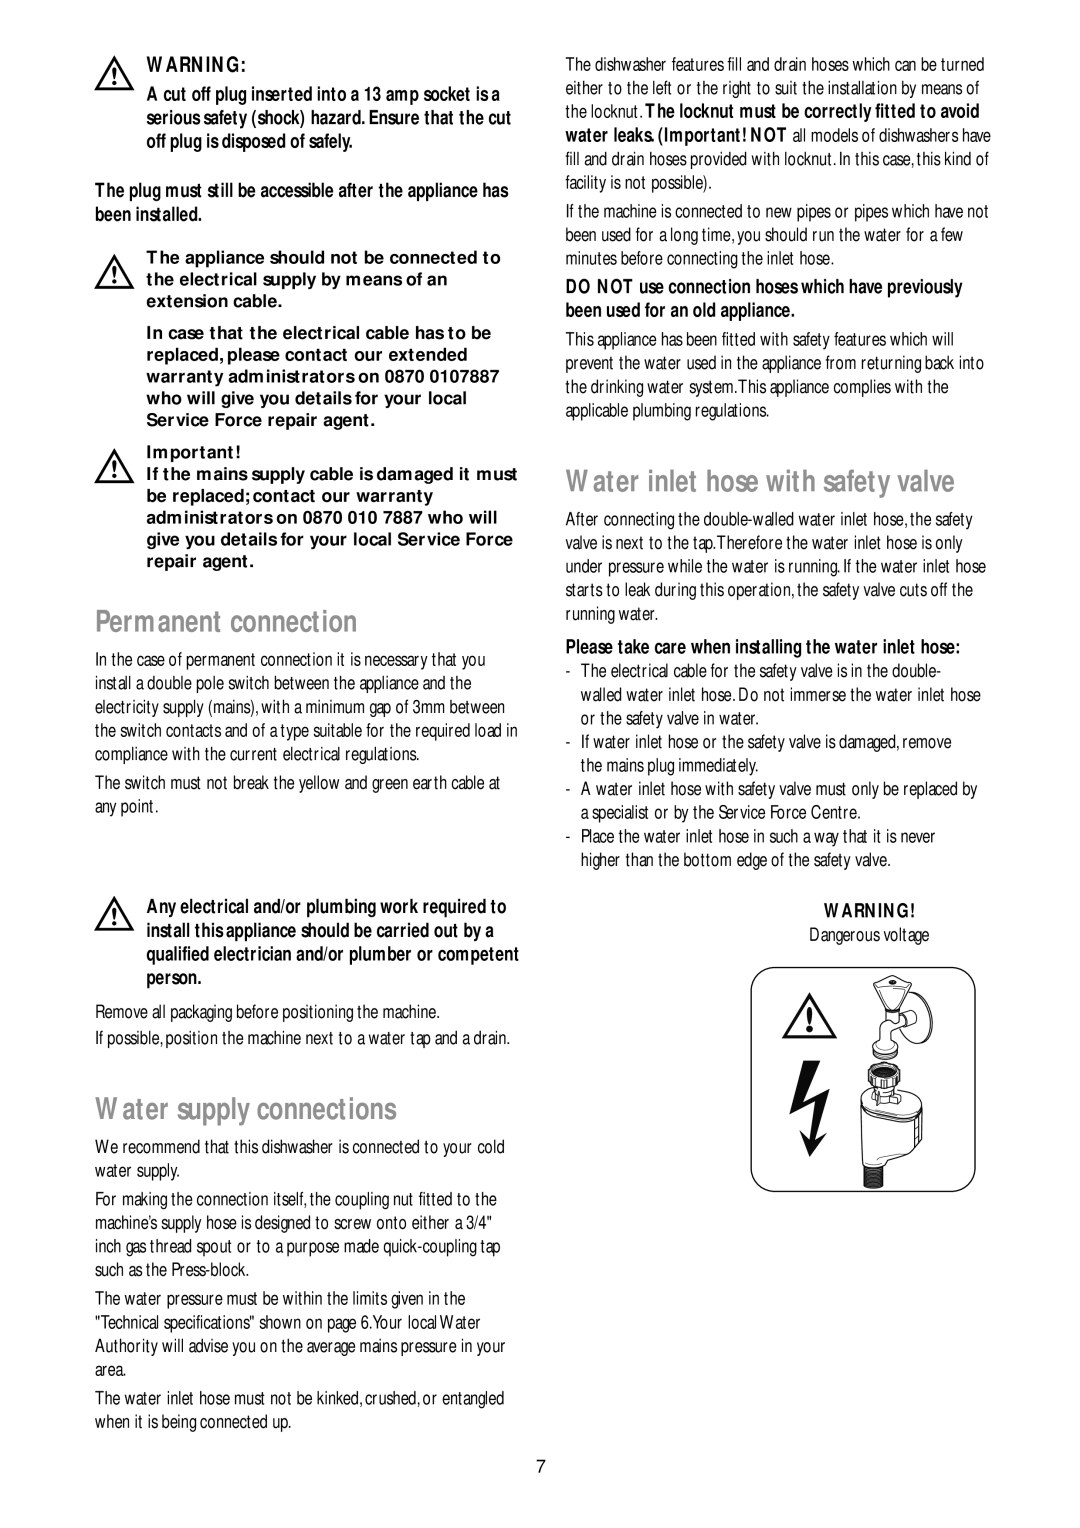 John Lewis JLBIDW 901 instruction manual Permanent connection, Water supply connections, Water inlet hose with safety valve 